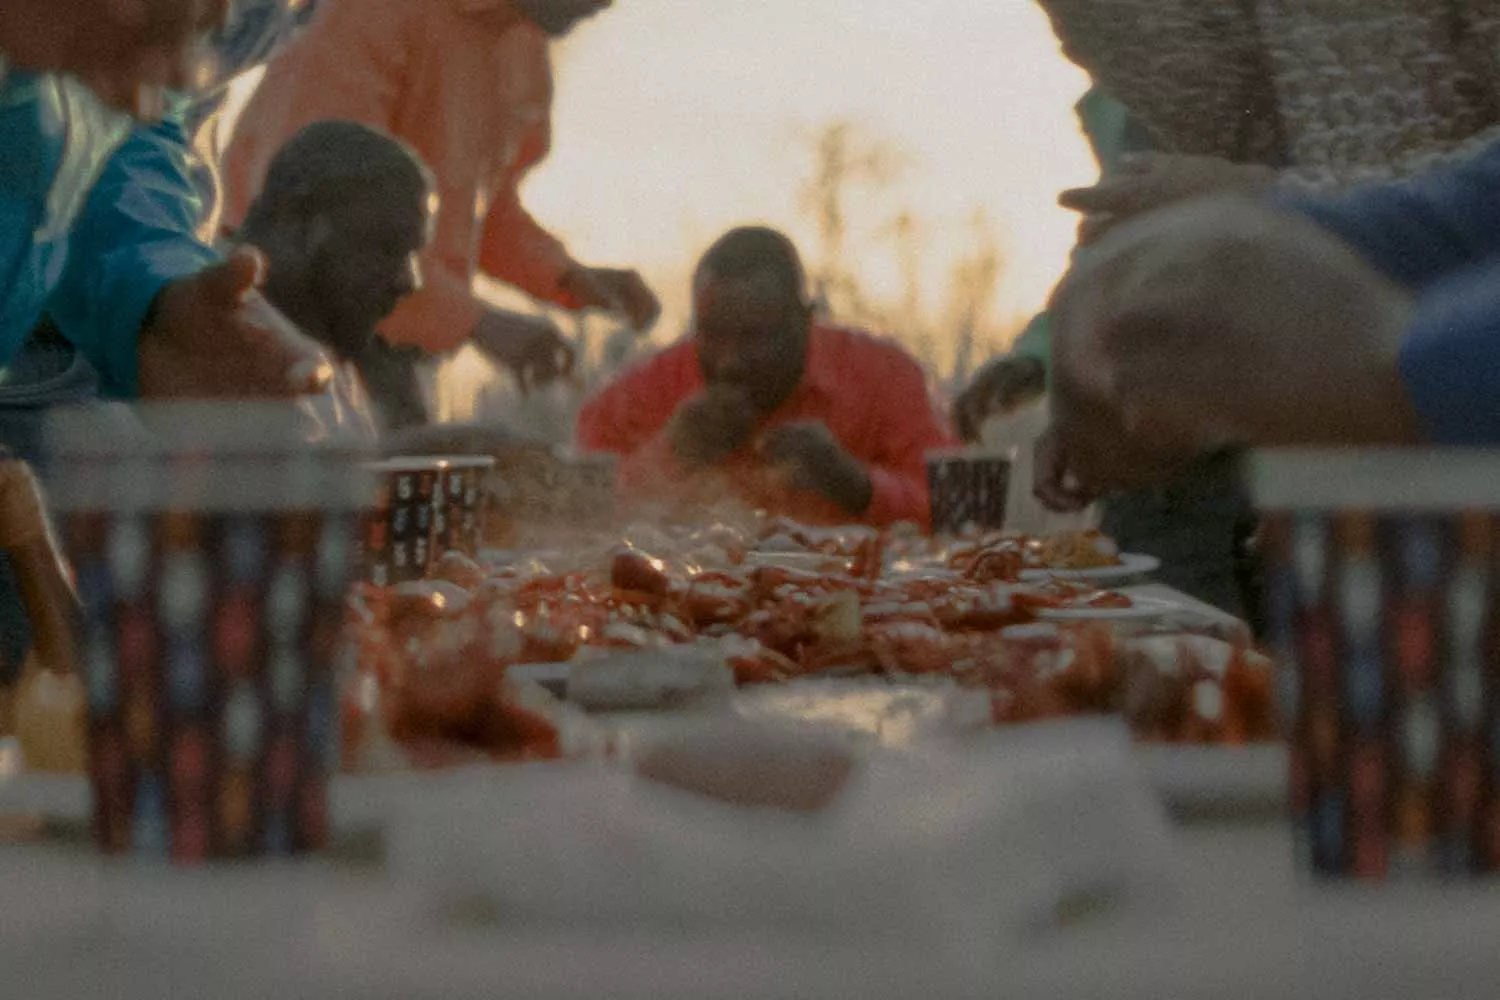 504 Boyz gathered around a table enjoying a crawfish boil and beverages in Chinet Comfort® cups